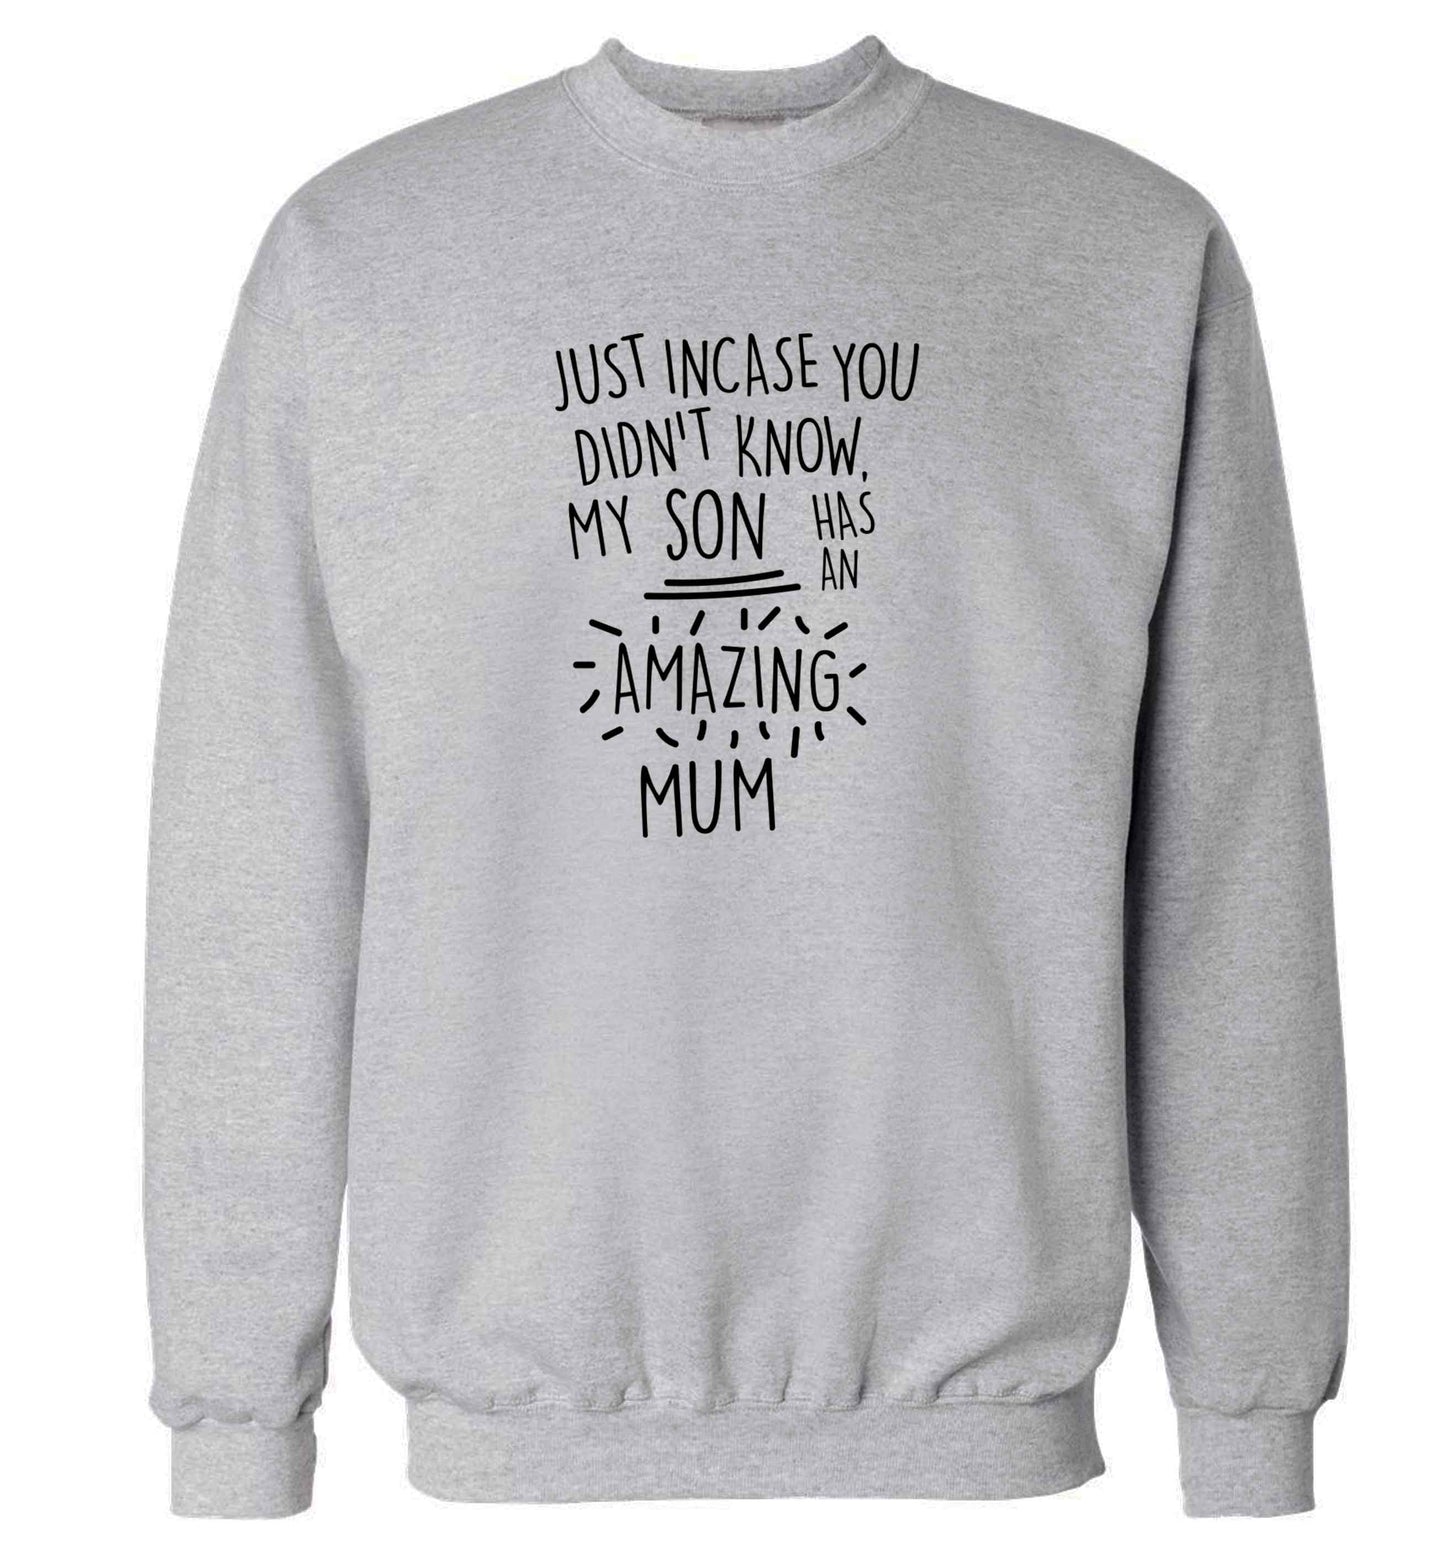 Just incase you didn't know my son has an amazing mum adult's unisex grey sweater 2XL